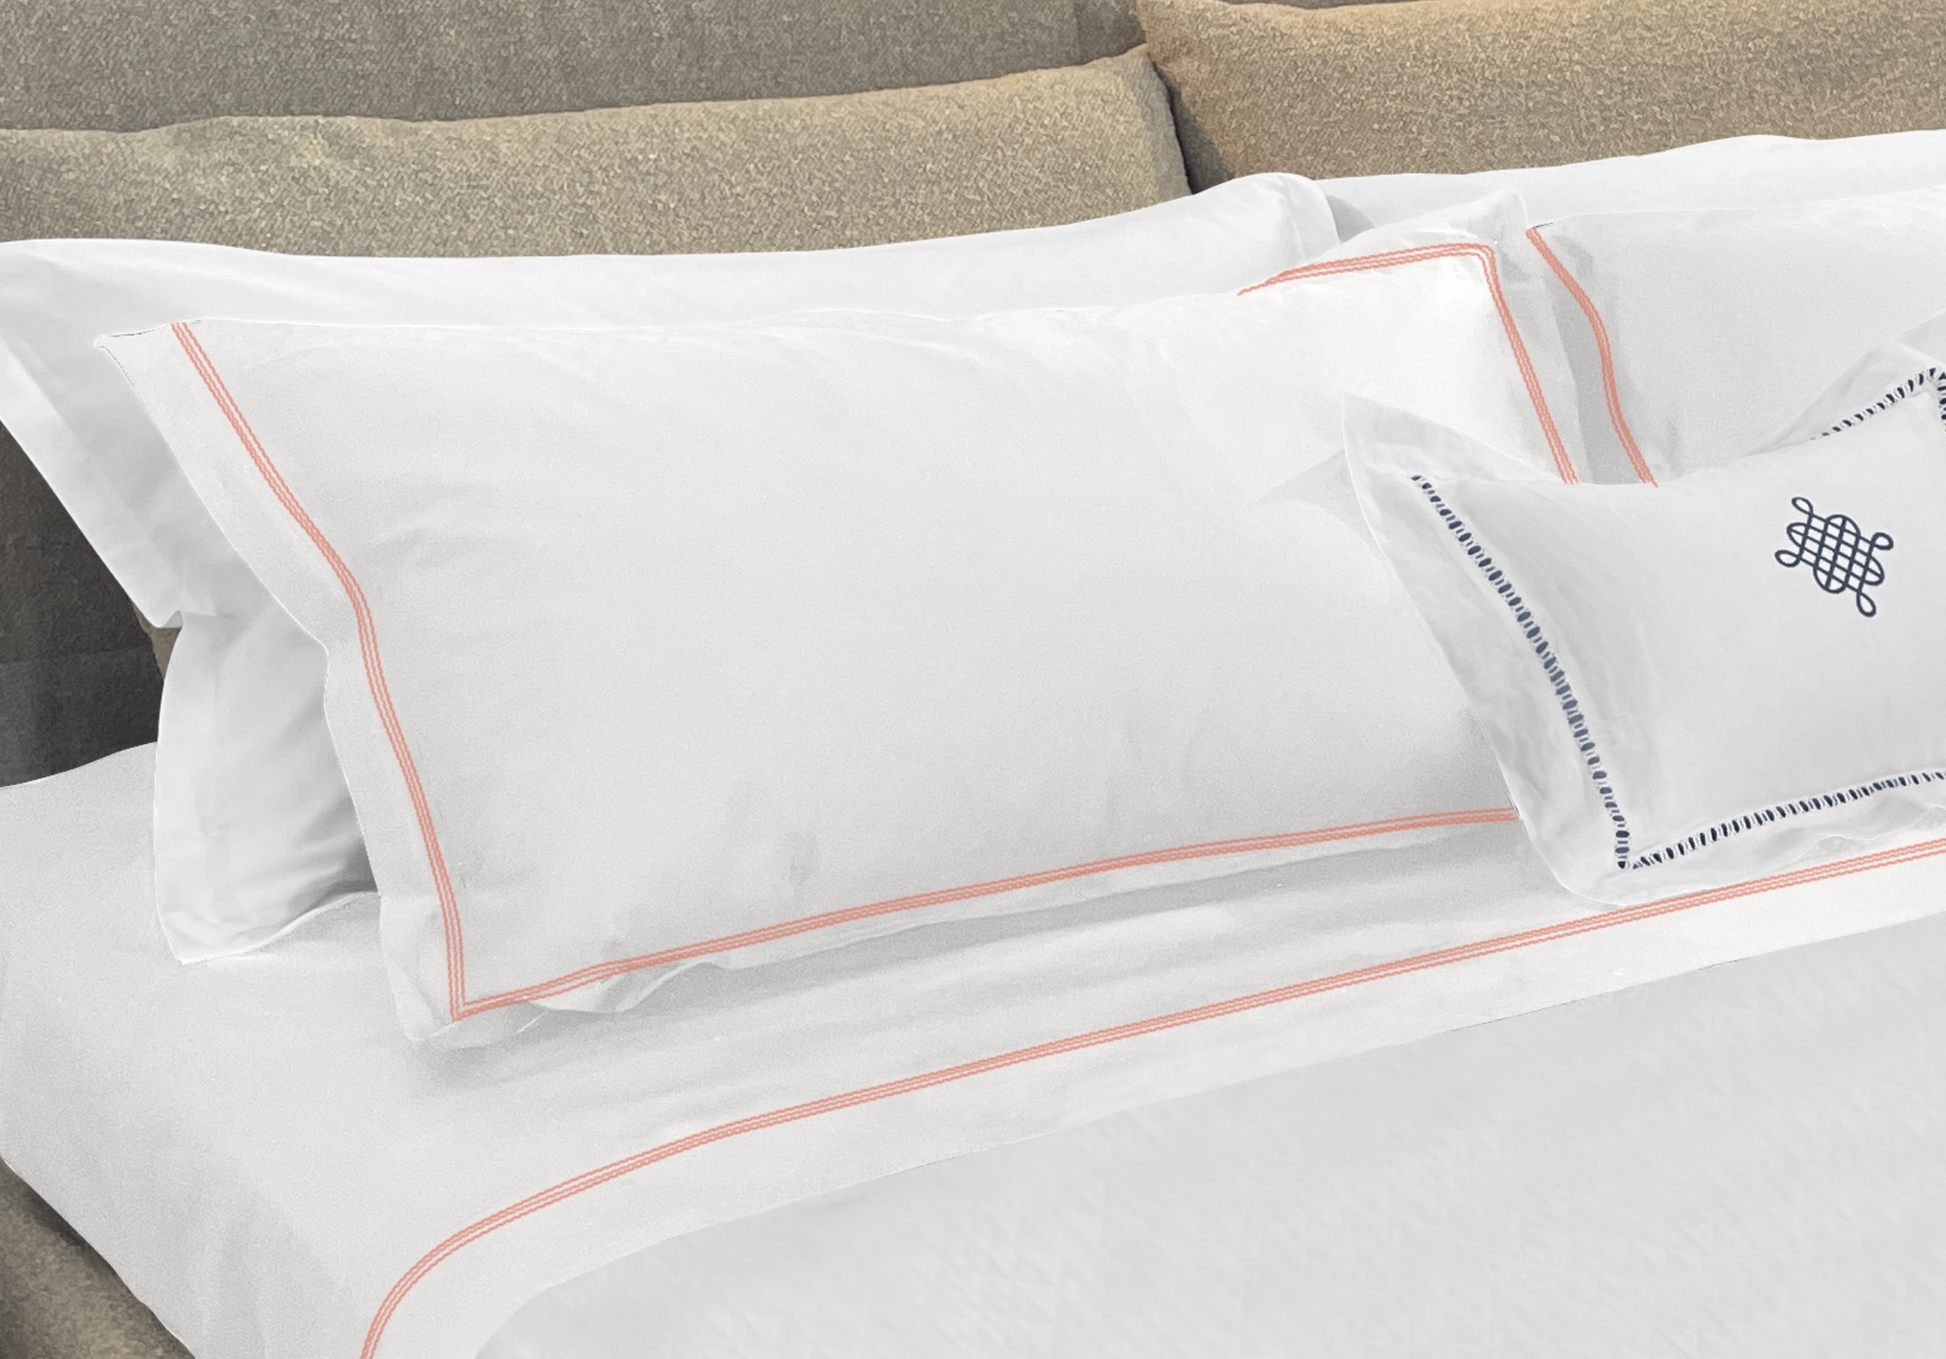 Narragansett White Pillow Sham with a triple contrasting stitch in Lobster. It is shown with our Daily Basics 300tc Egyptian Cotton Sateen Sleeping Sham in White. 